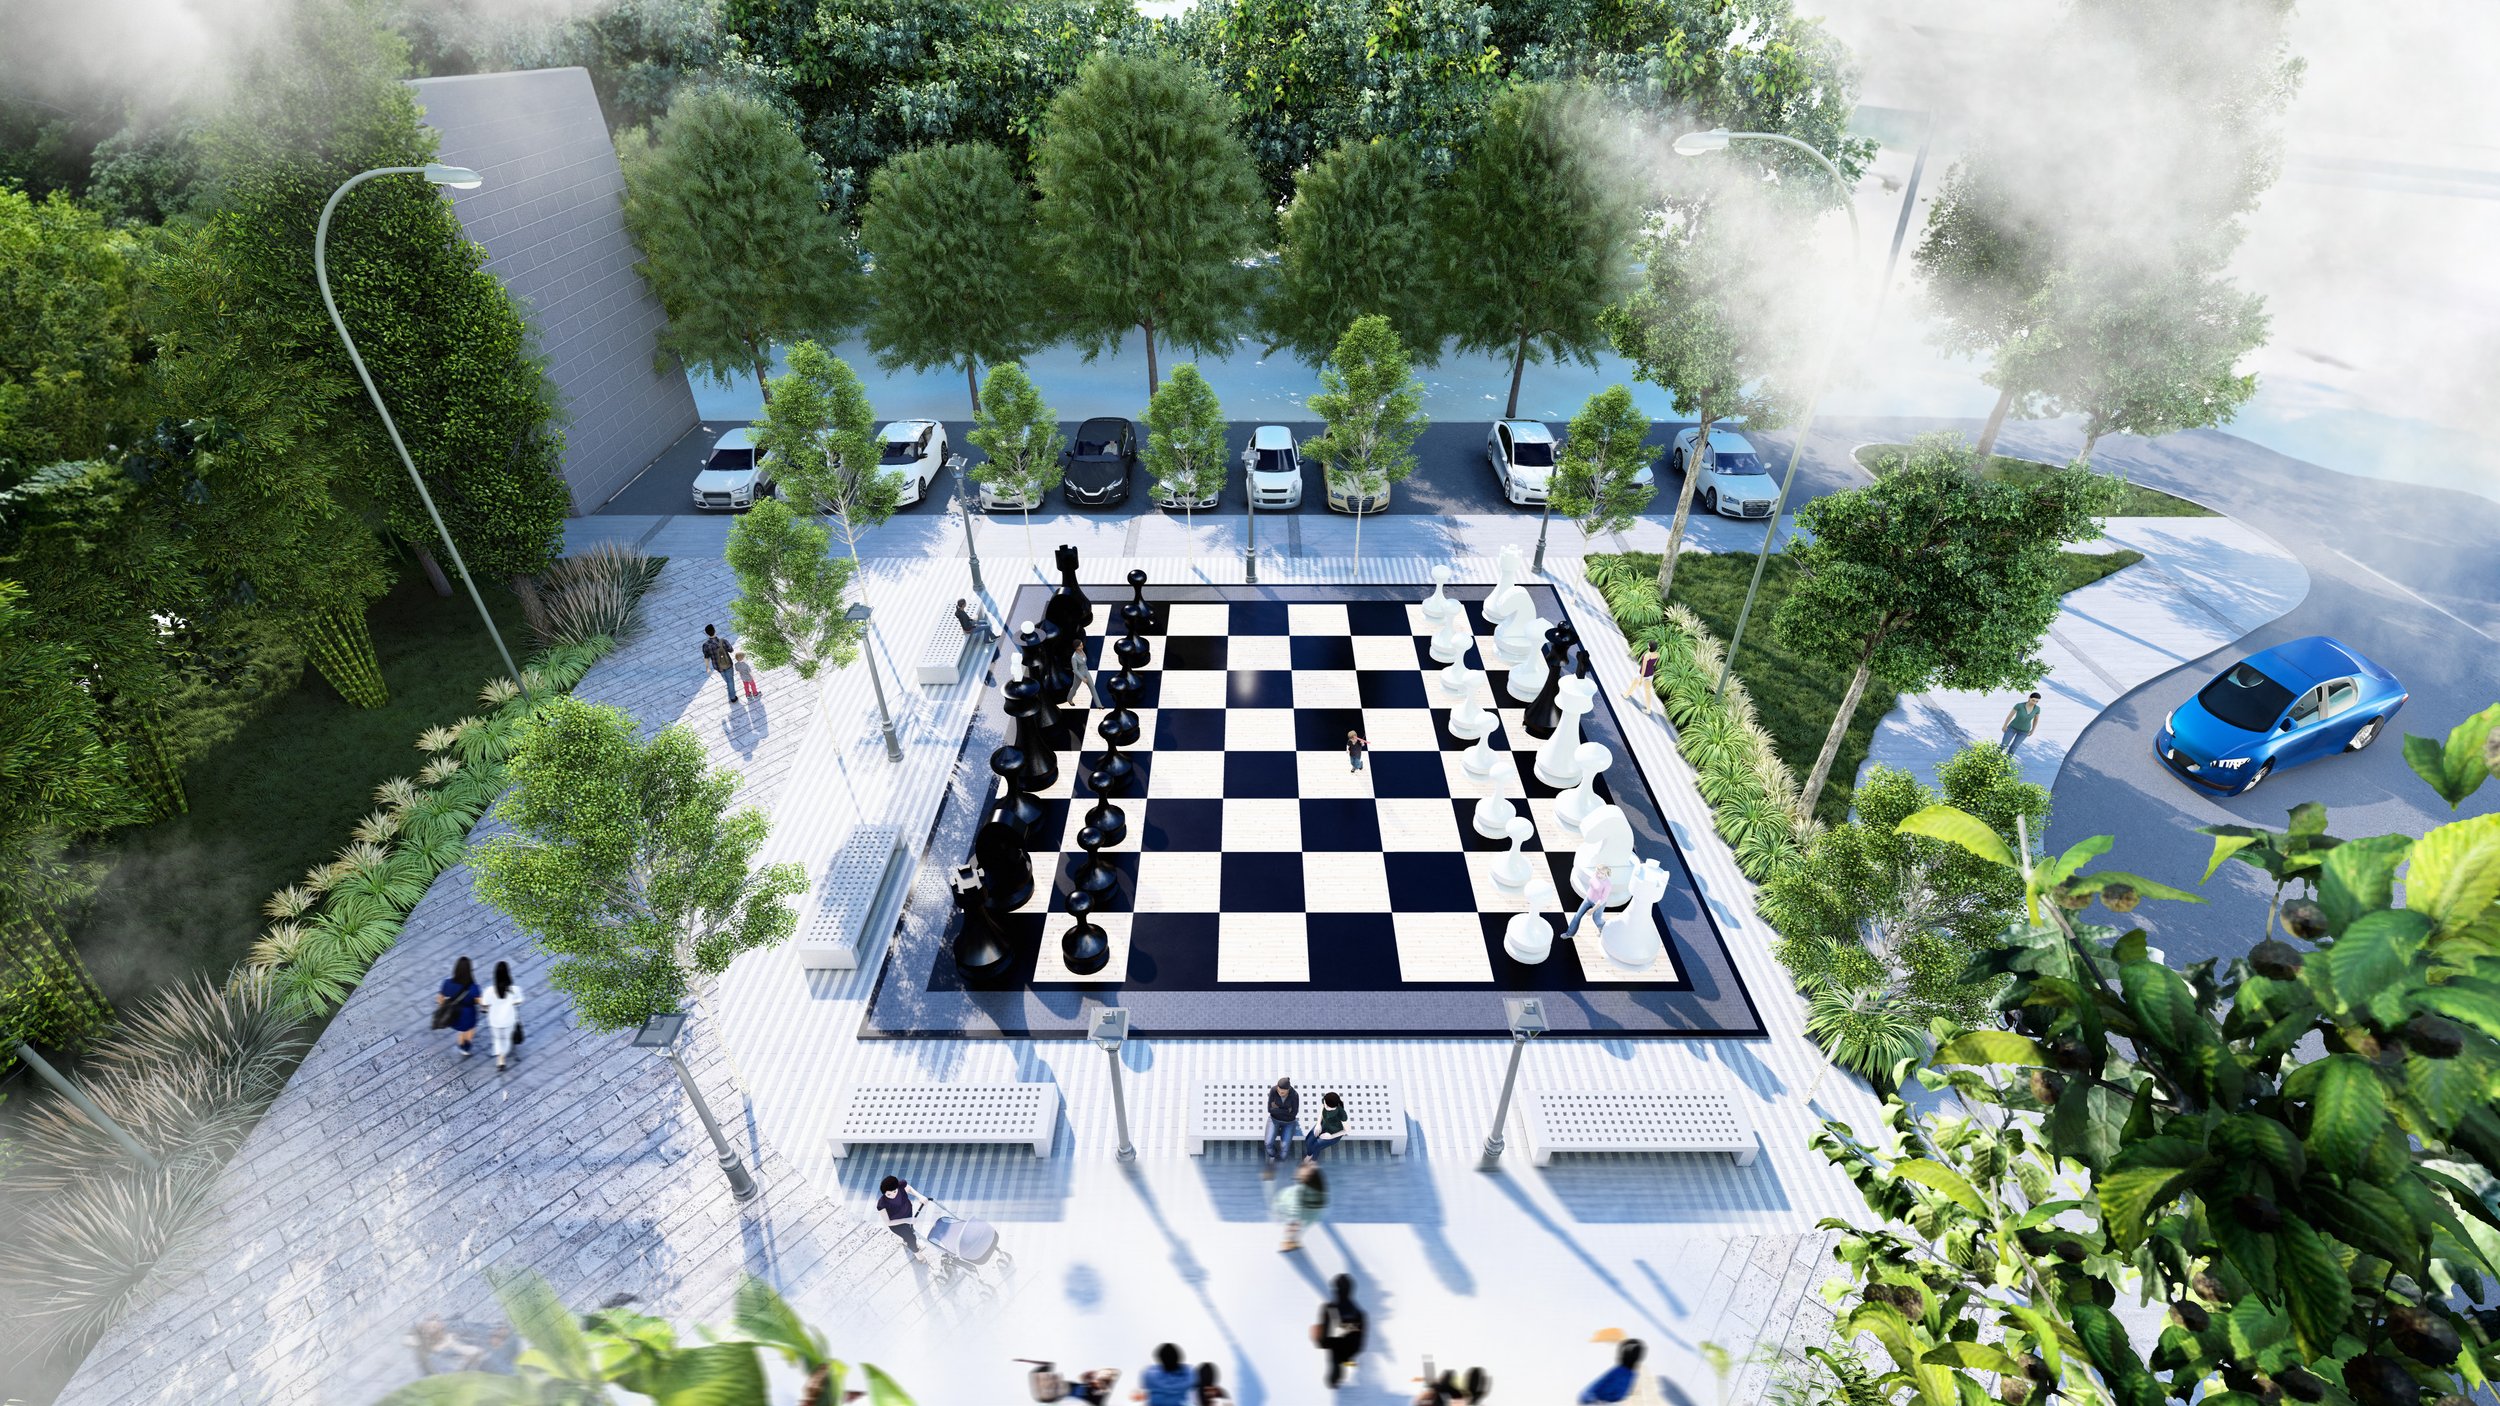 Life-Sized Chess Installation